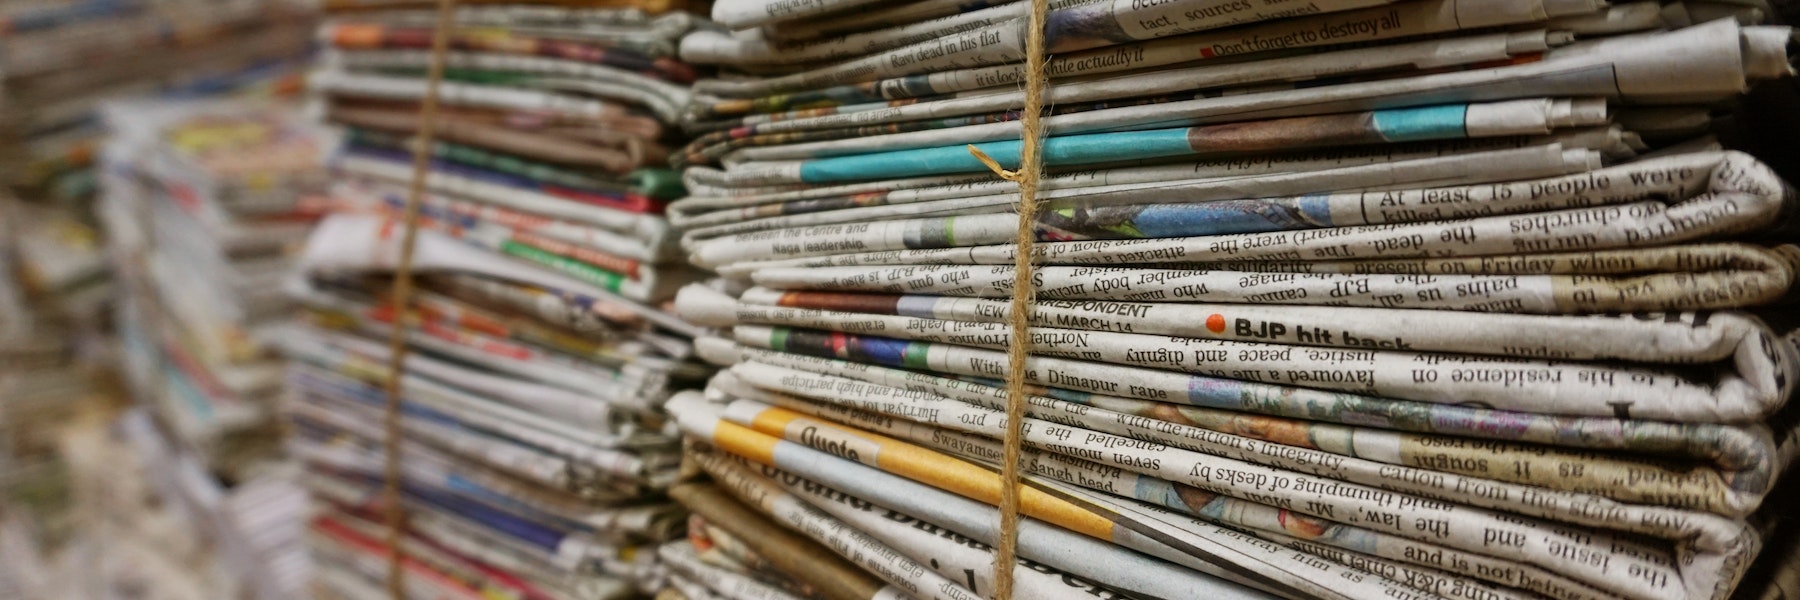 A pile of newspapers tied with a string